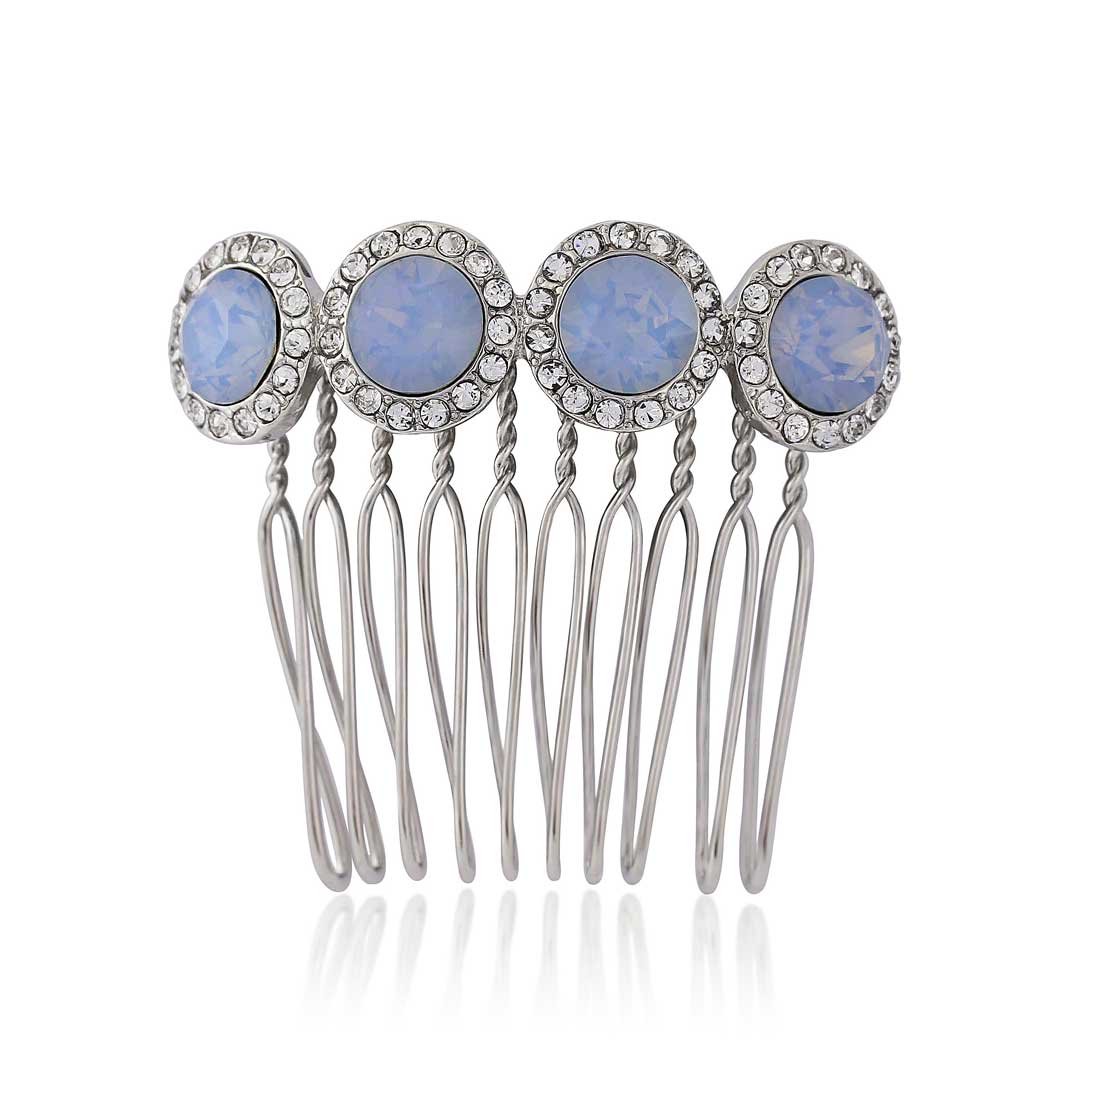 Shimmering Sky Blue Crystal Hair Comb for Weddings & Bridesmaids